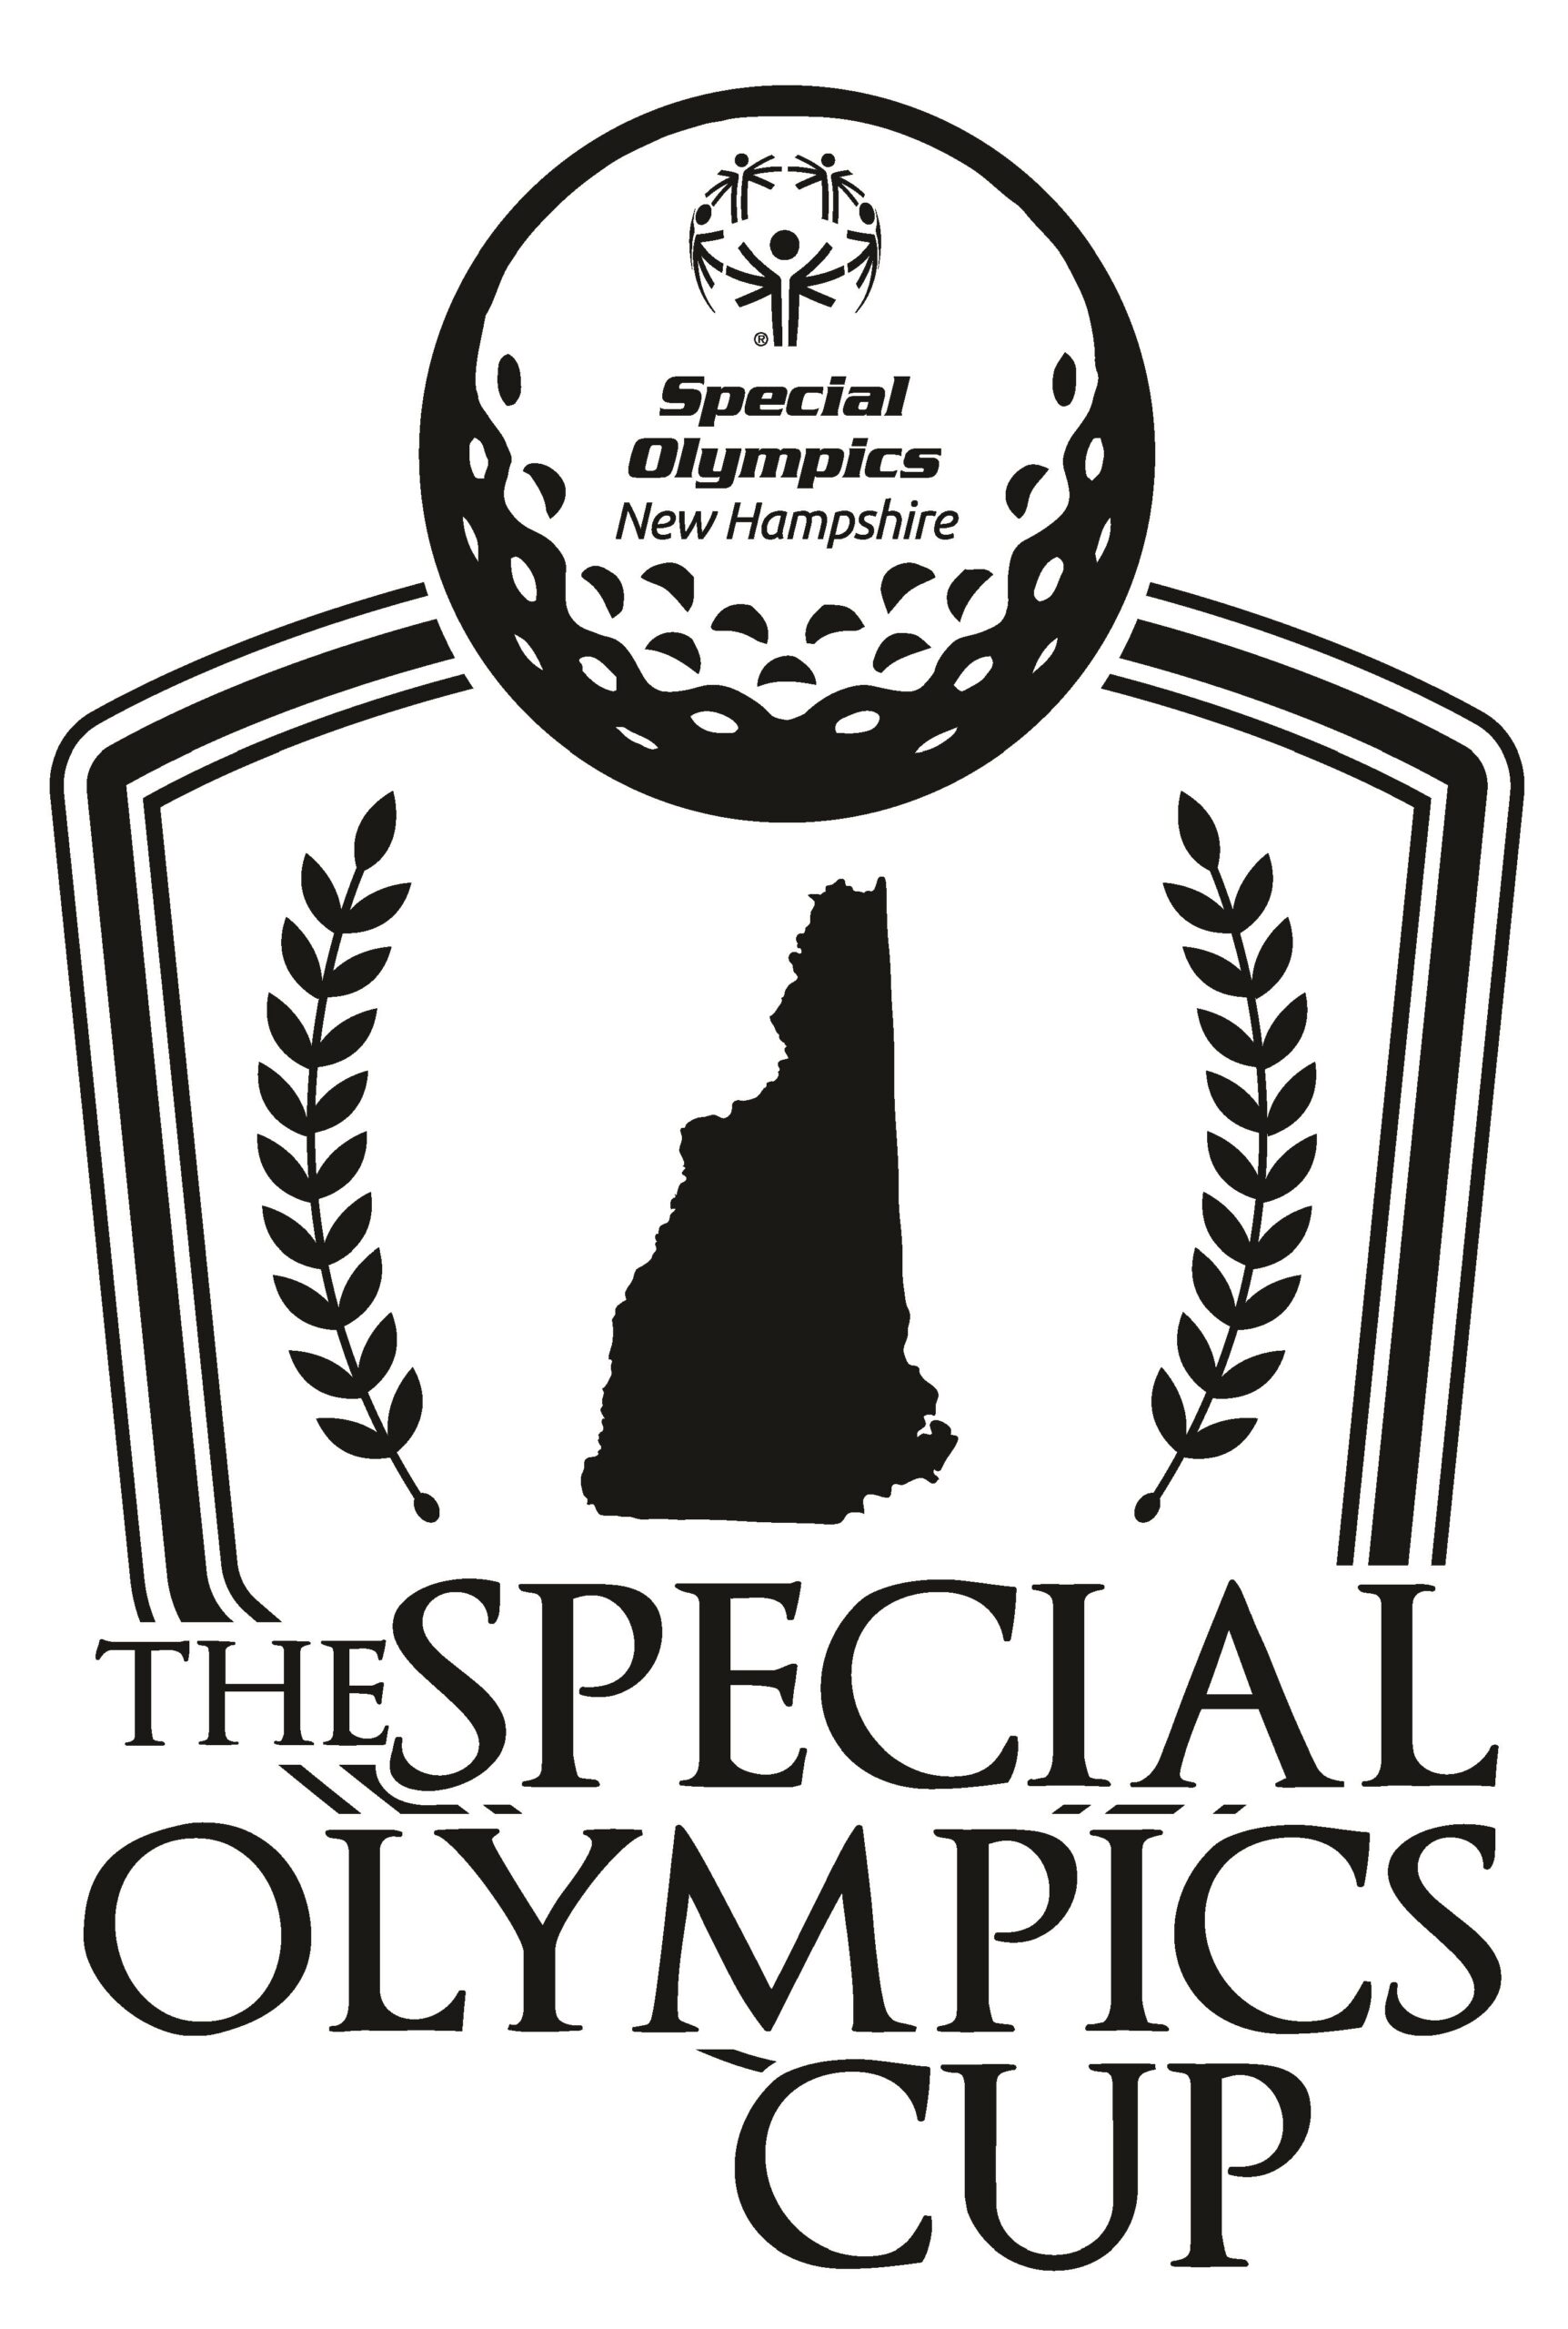 2nd Annual Special Olympics Cup Special Olympics New Hampshire